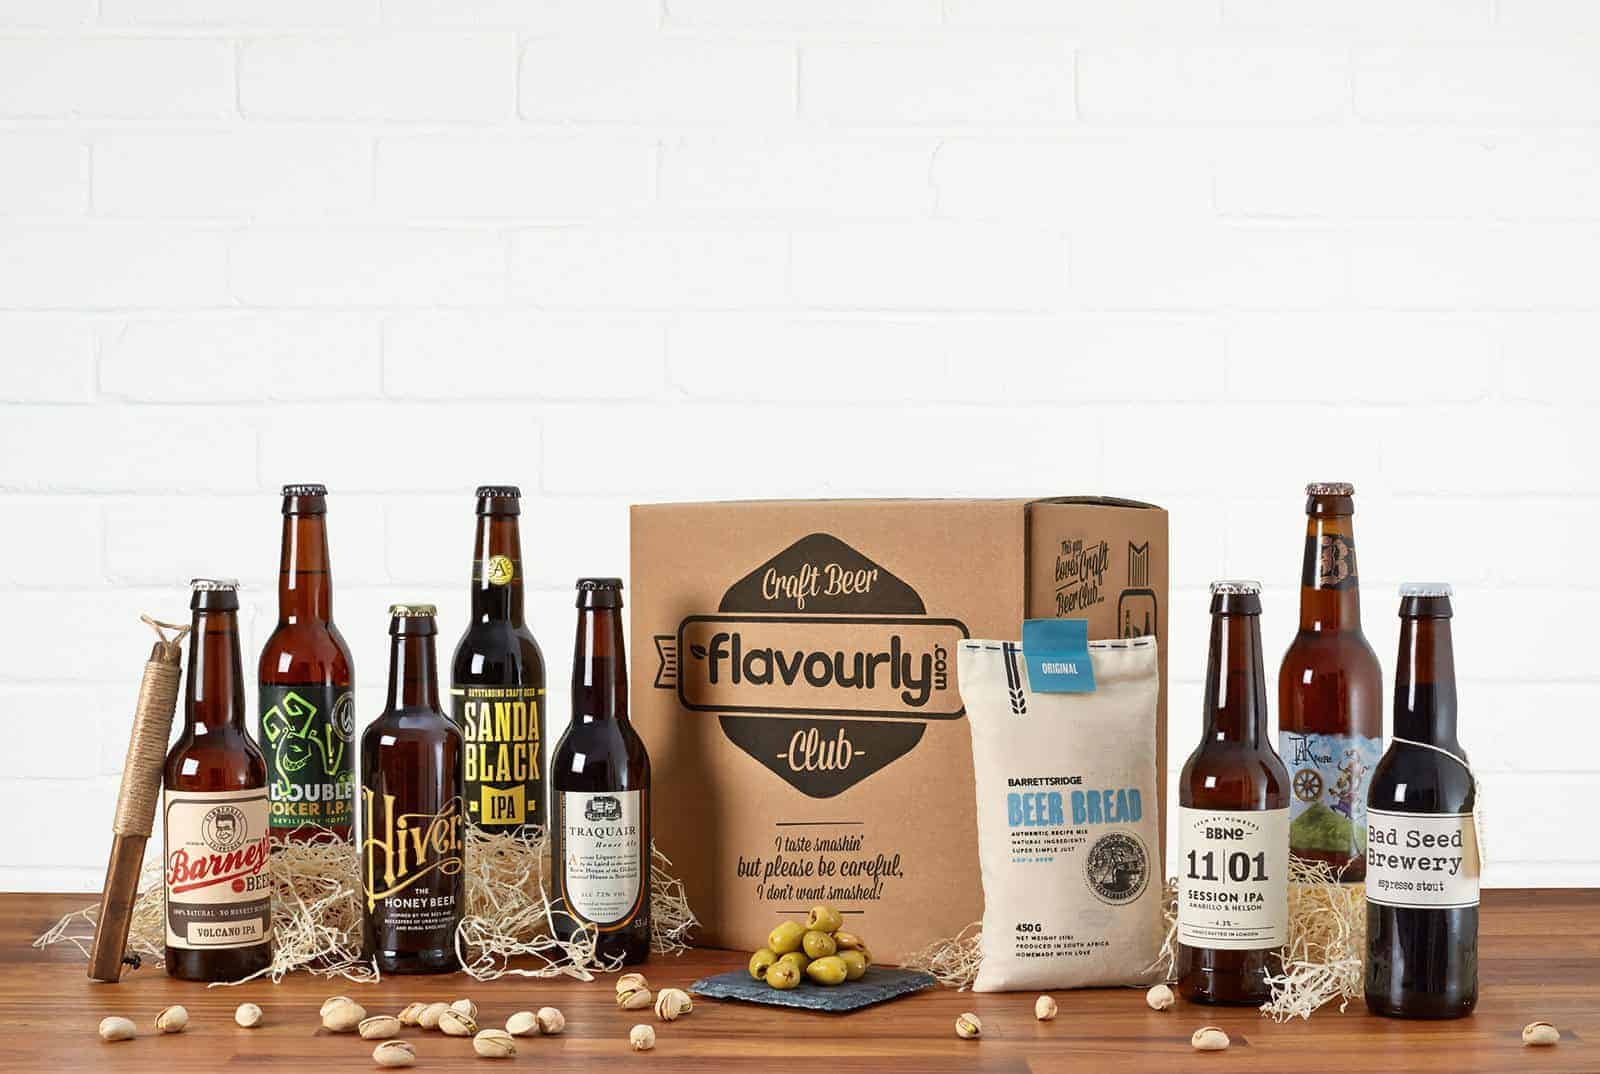 Flavourly Craft Beer Club